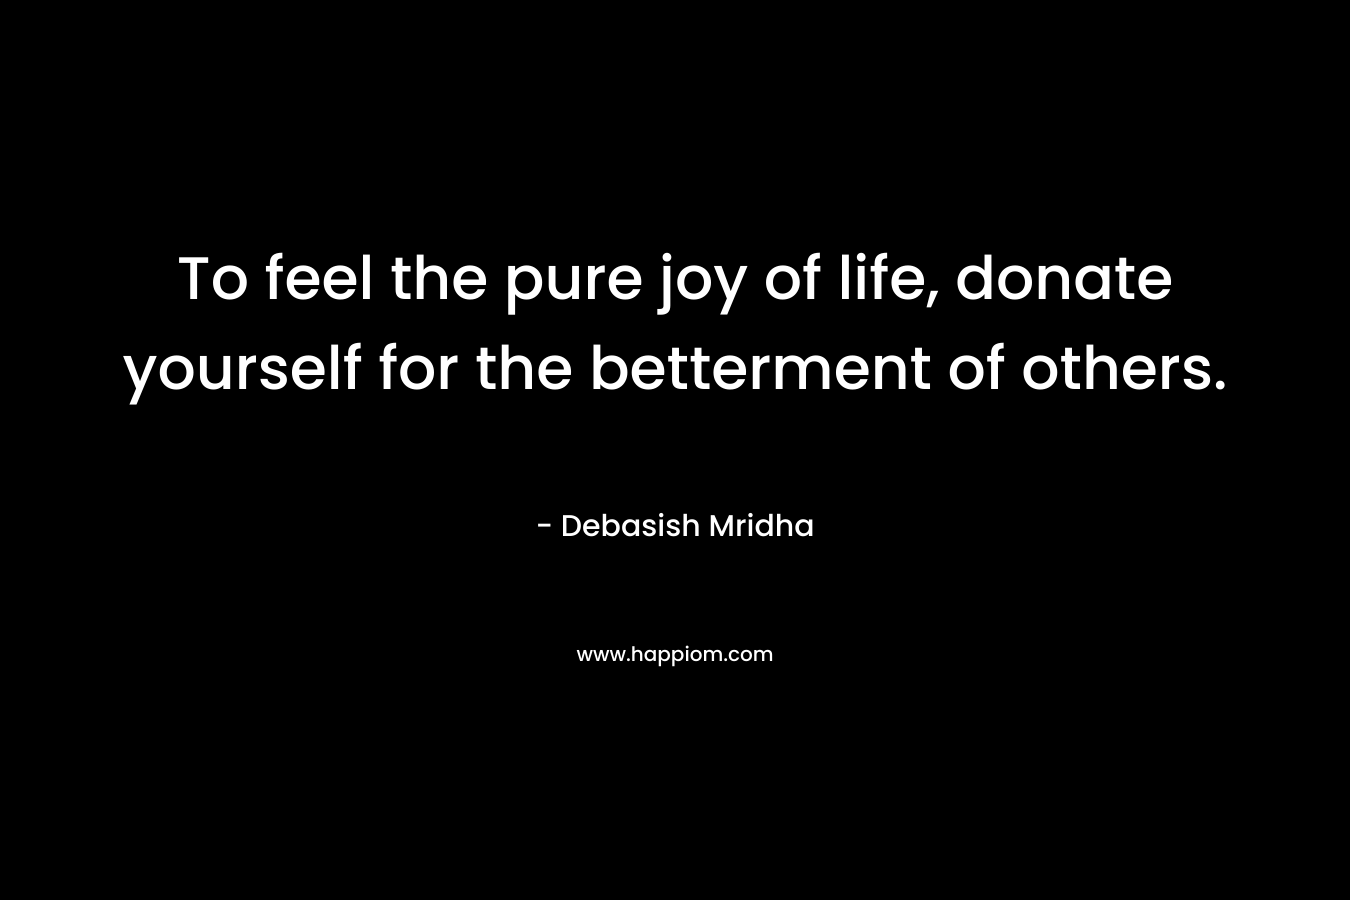 To feel the pure joy of life, donate yourself for the betterment of others. – Debasish Mridha